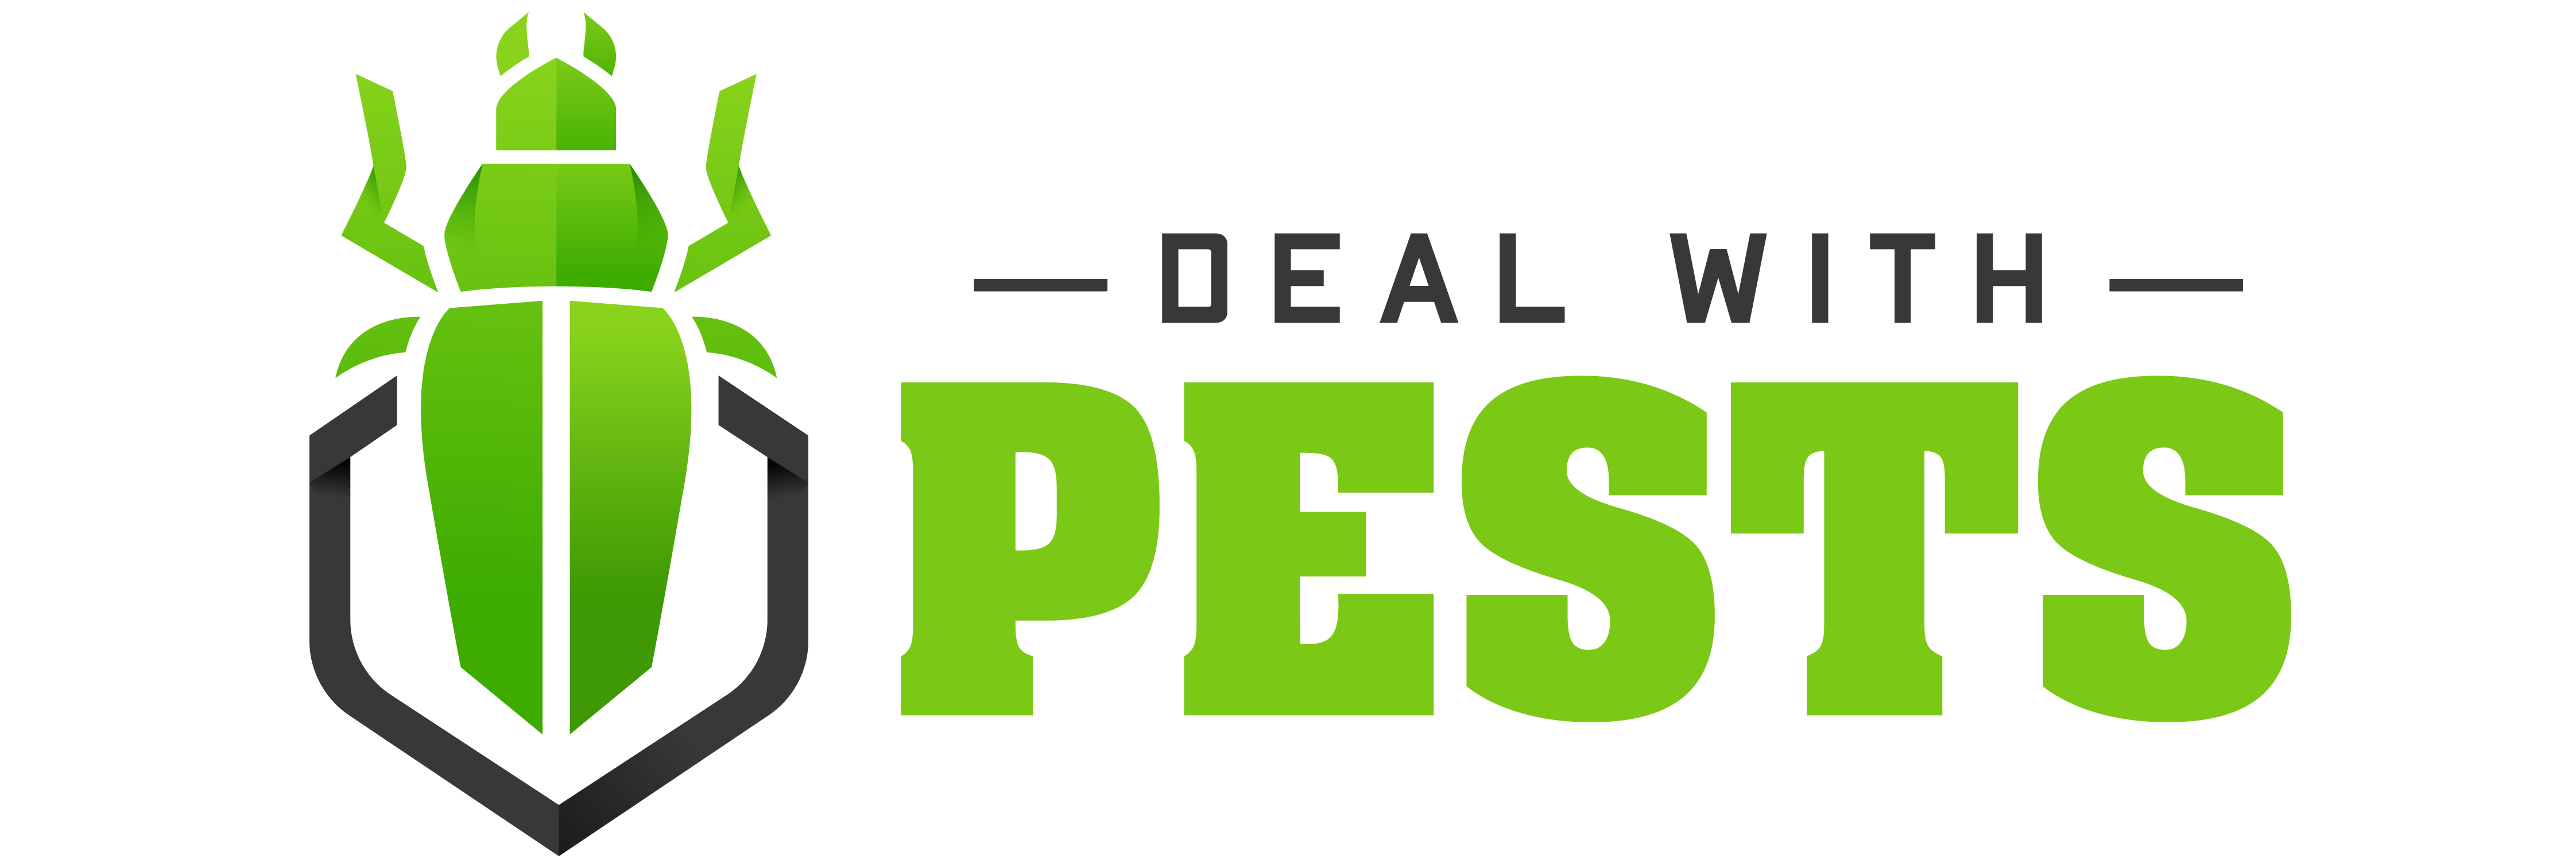 Deal With Pests